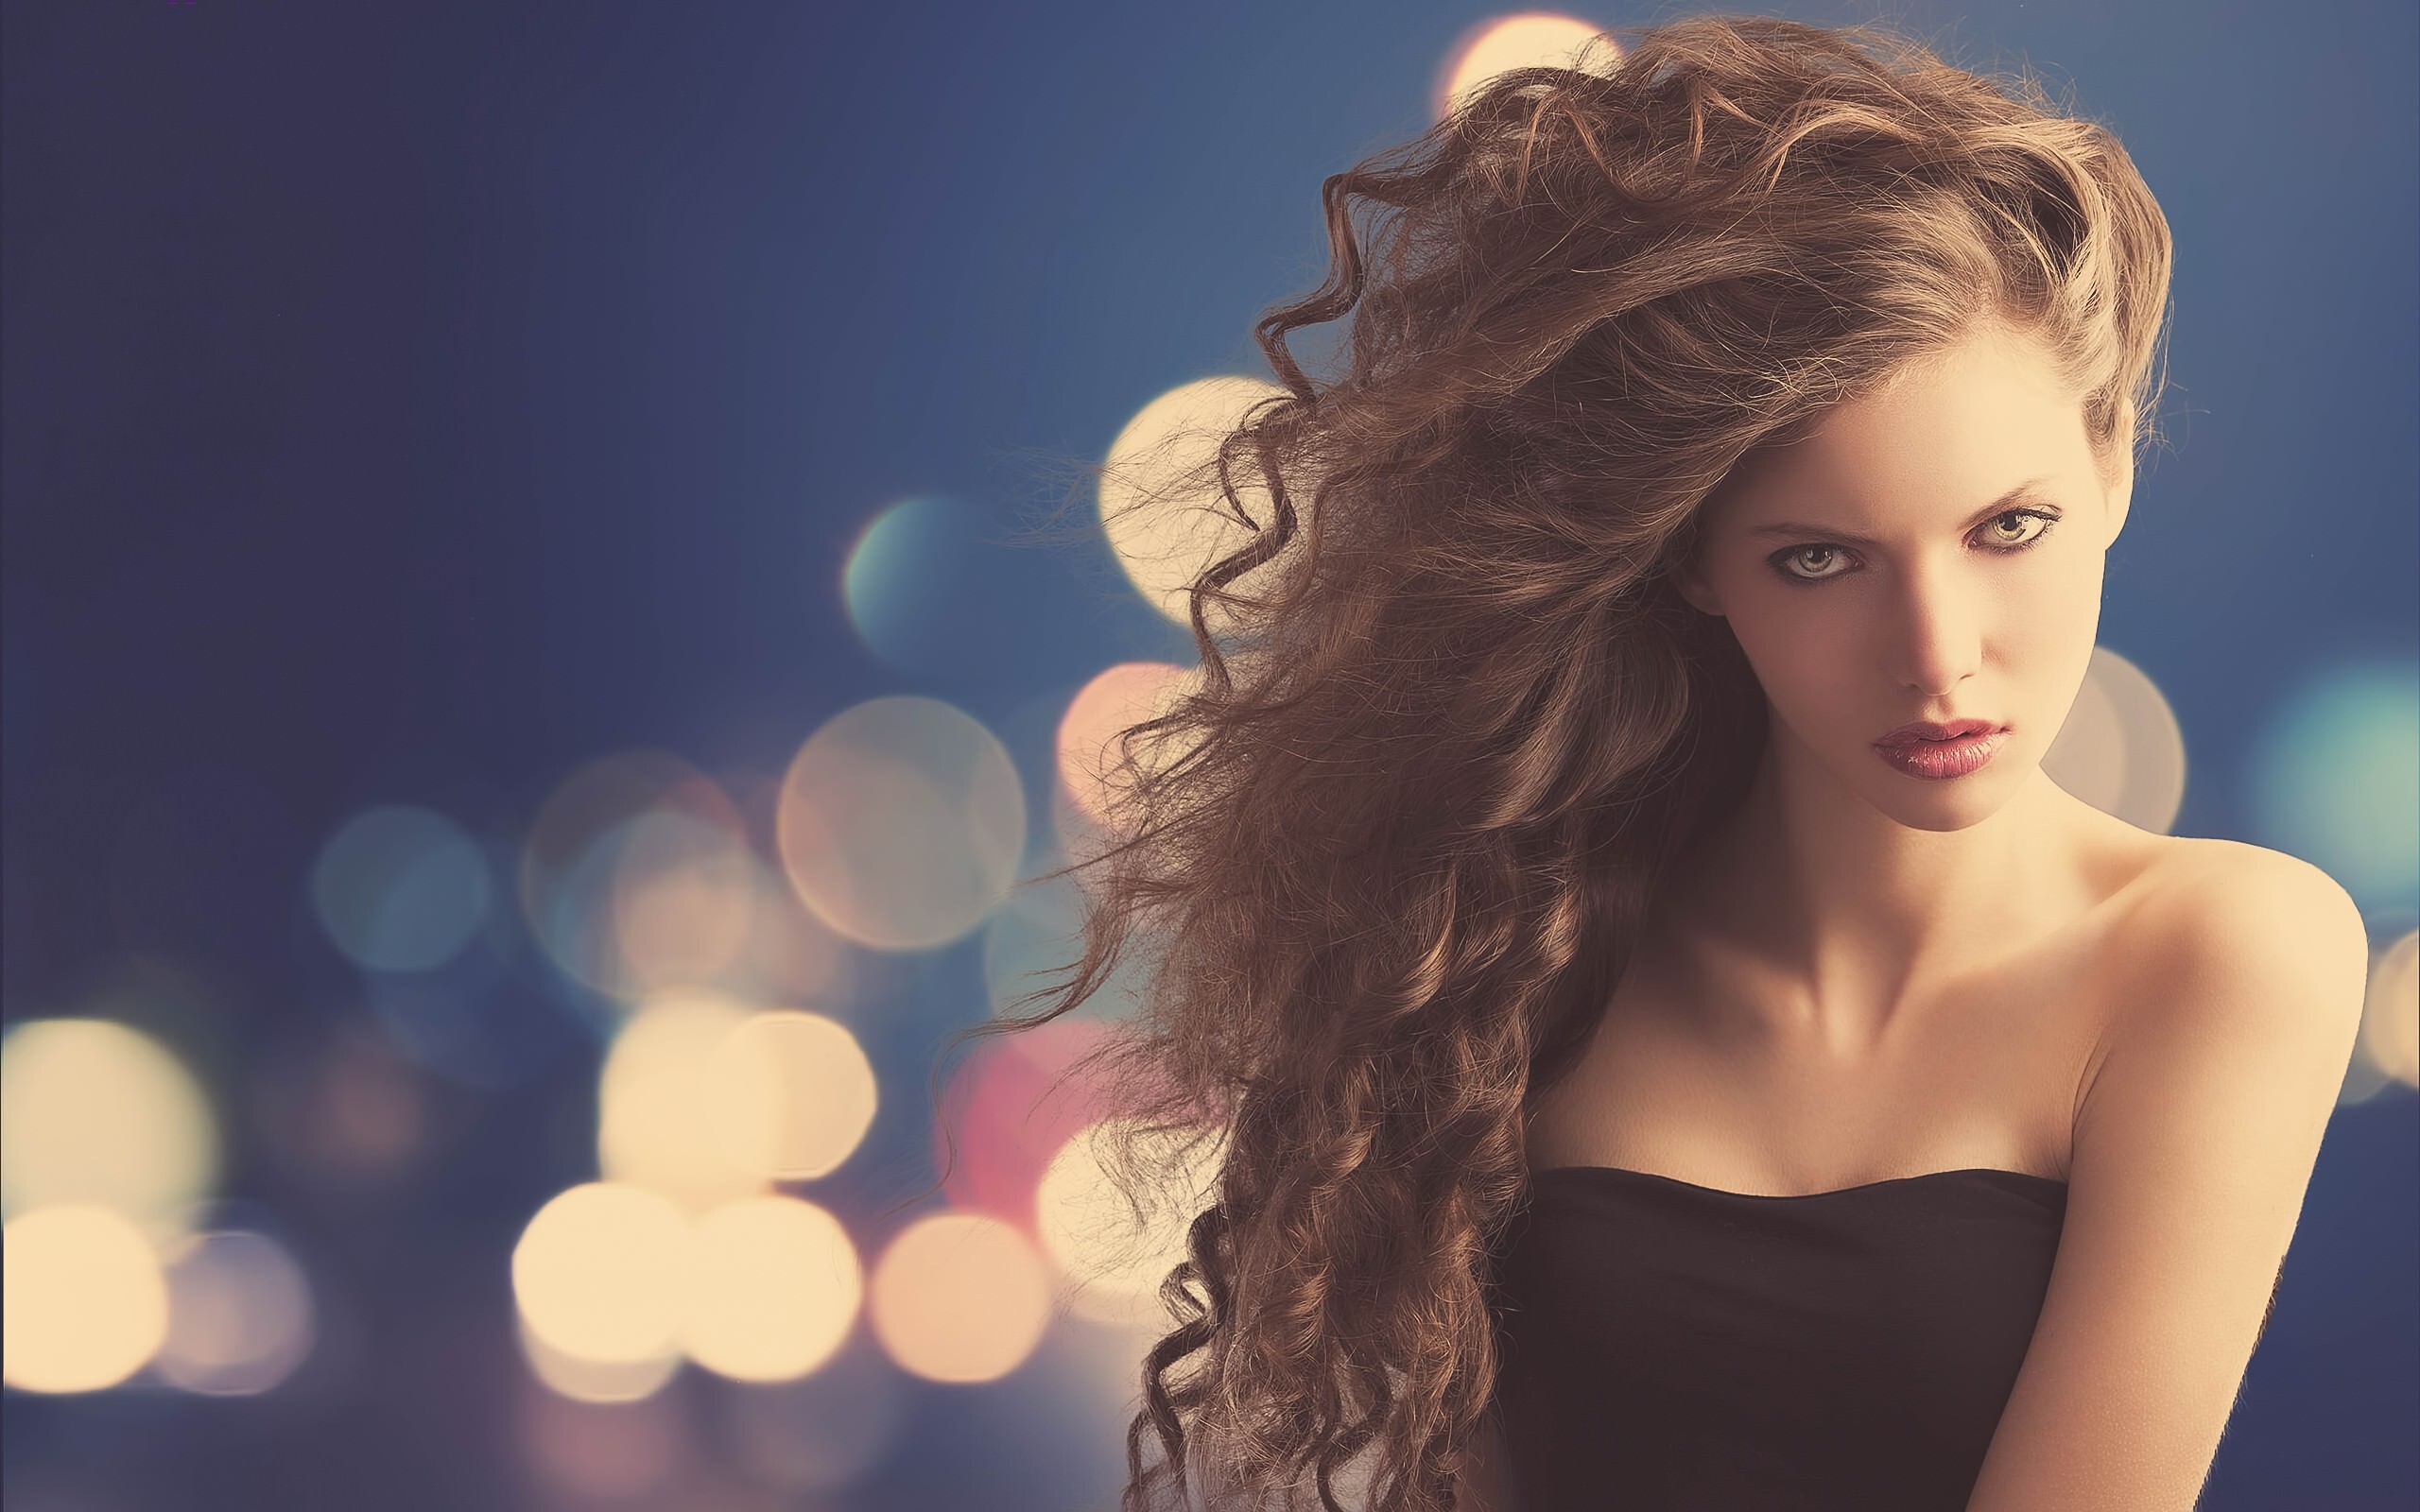 Fashion Model: Style, Aesthetic out-of-focus blur effect, Modeling, Makeover. 2560x1600 HD Wallpaper.